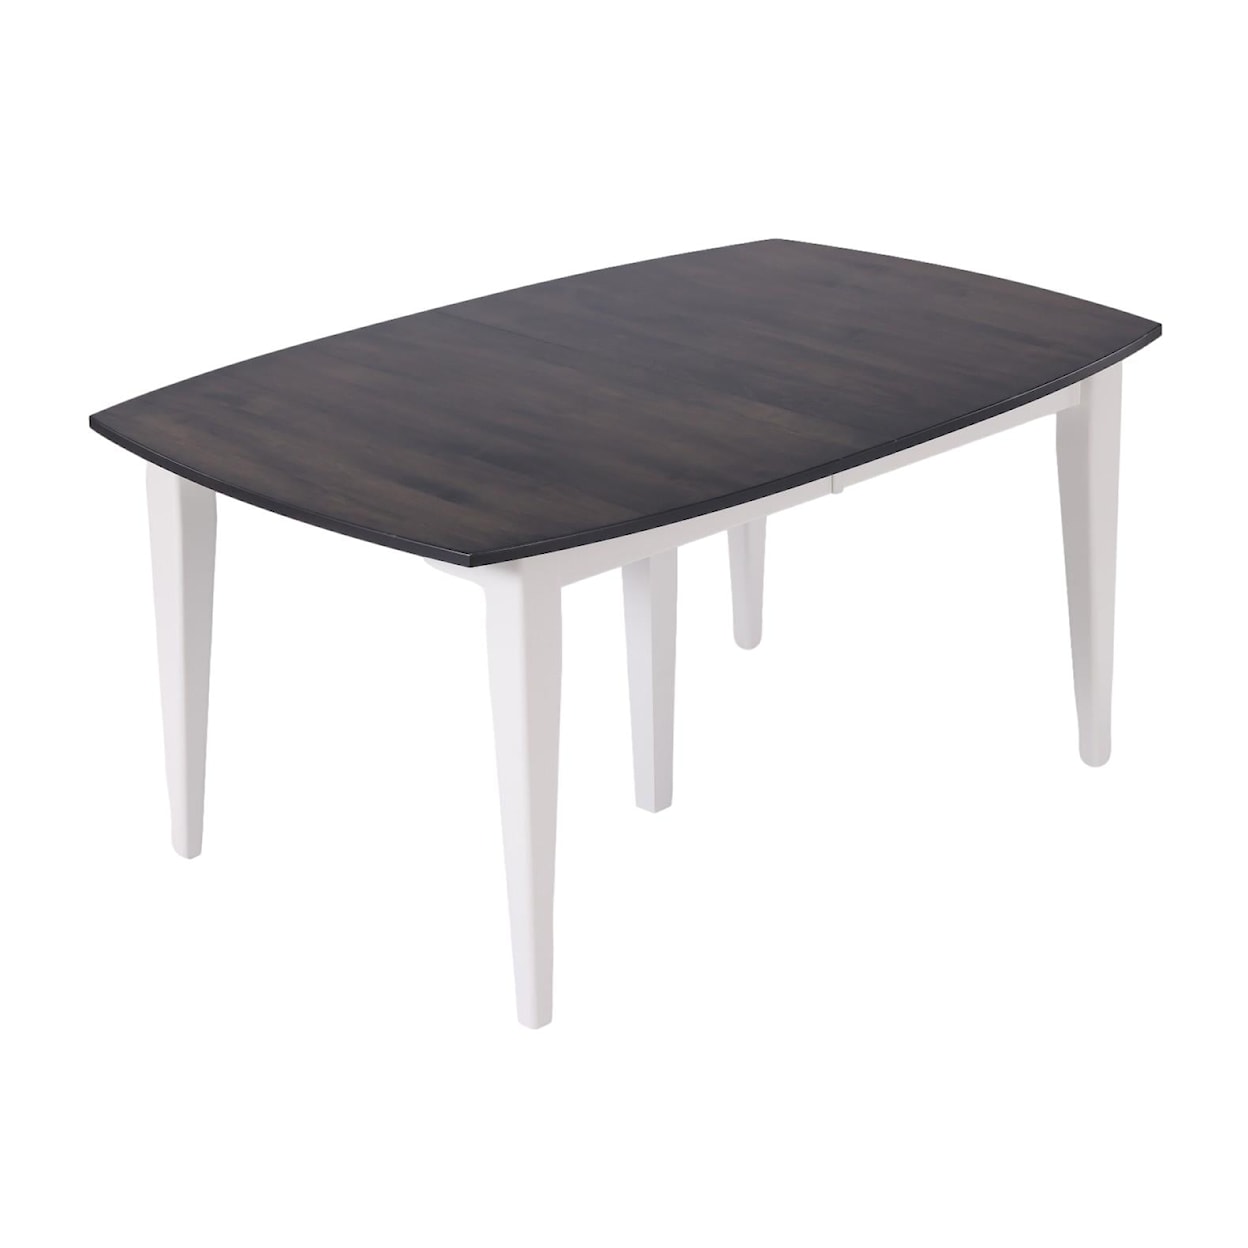 L.J. Gascho Furniture Maiden Casual Dining Table